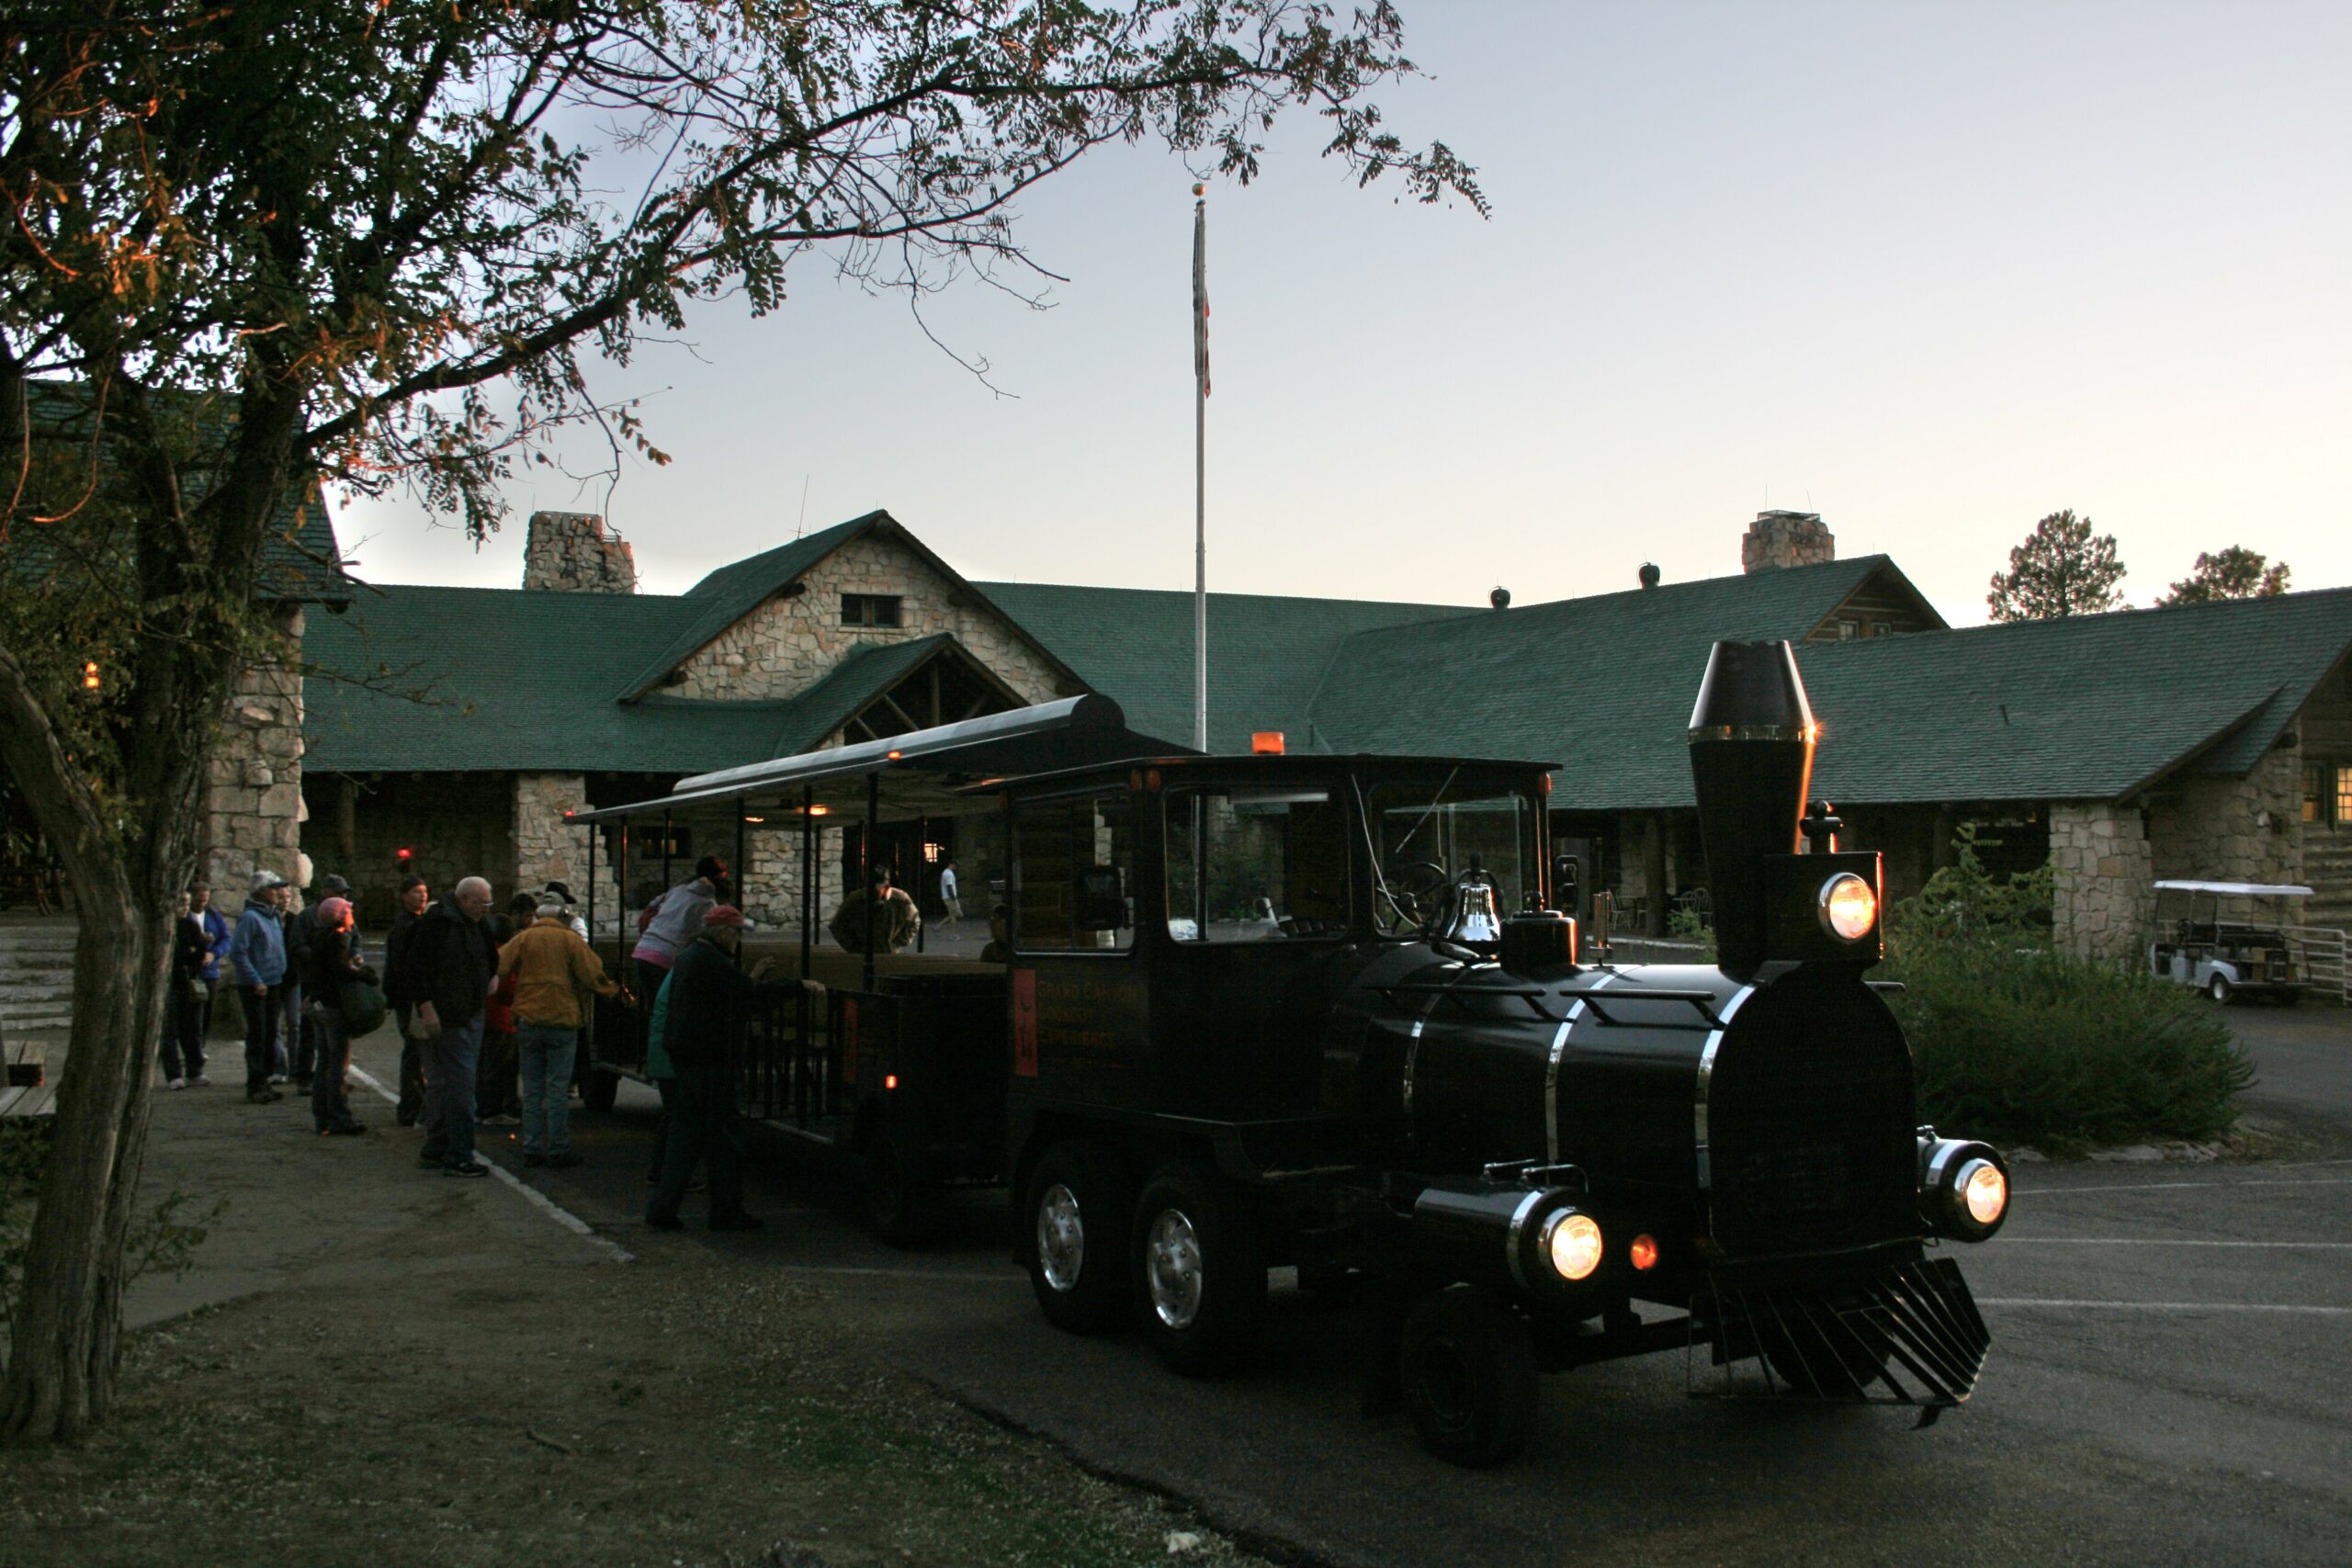 A truck-tram made to look like a 1920s train brings guests to the Grand Canyon Cookout Experience.